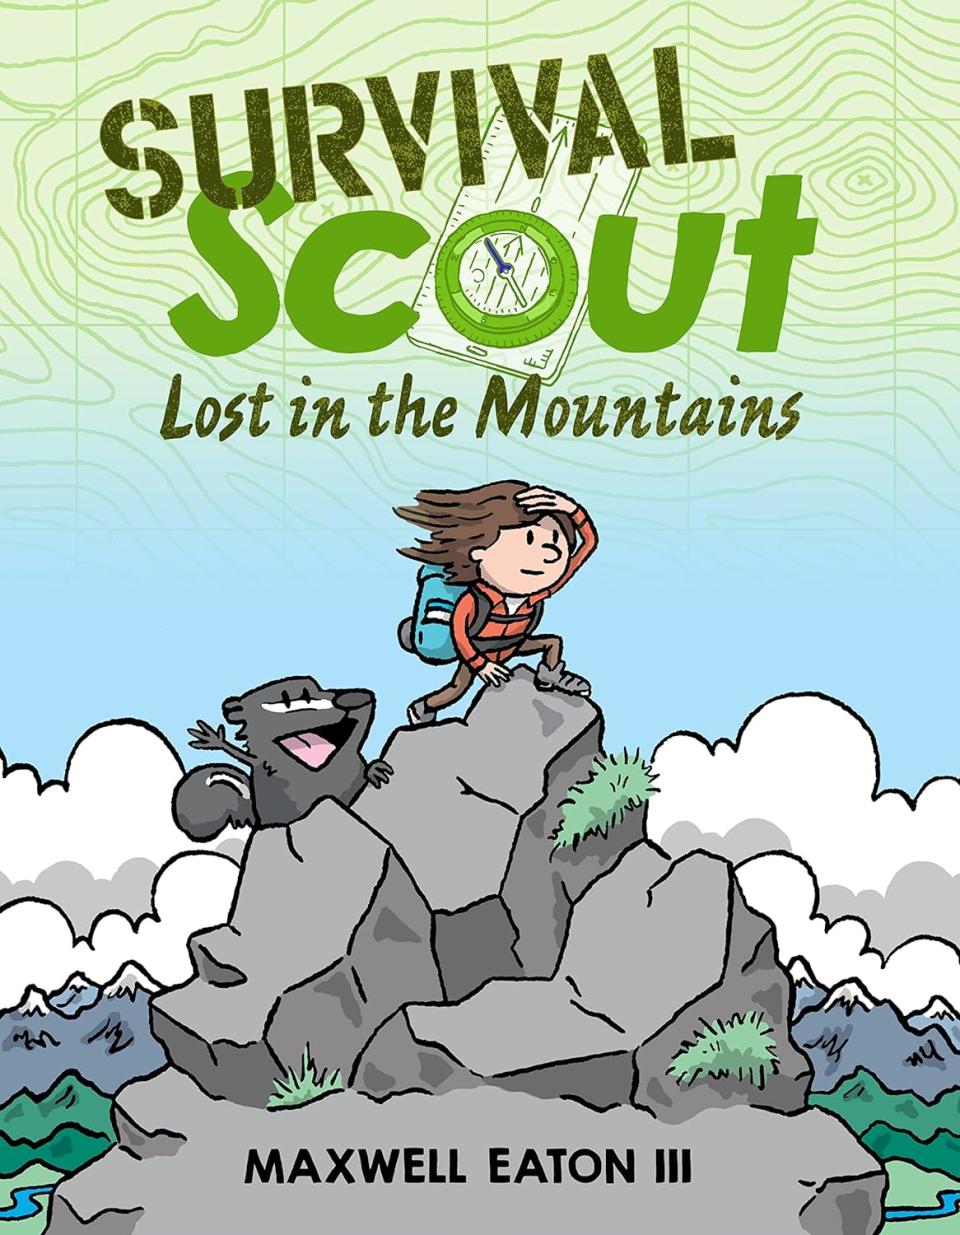 "Survival Scout: Lost in the Mountains"